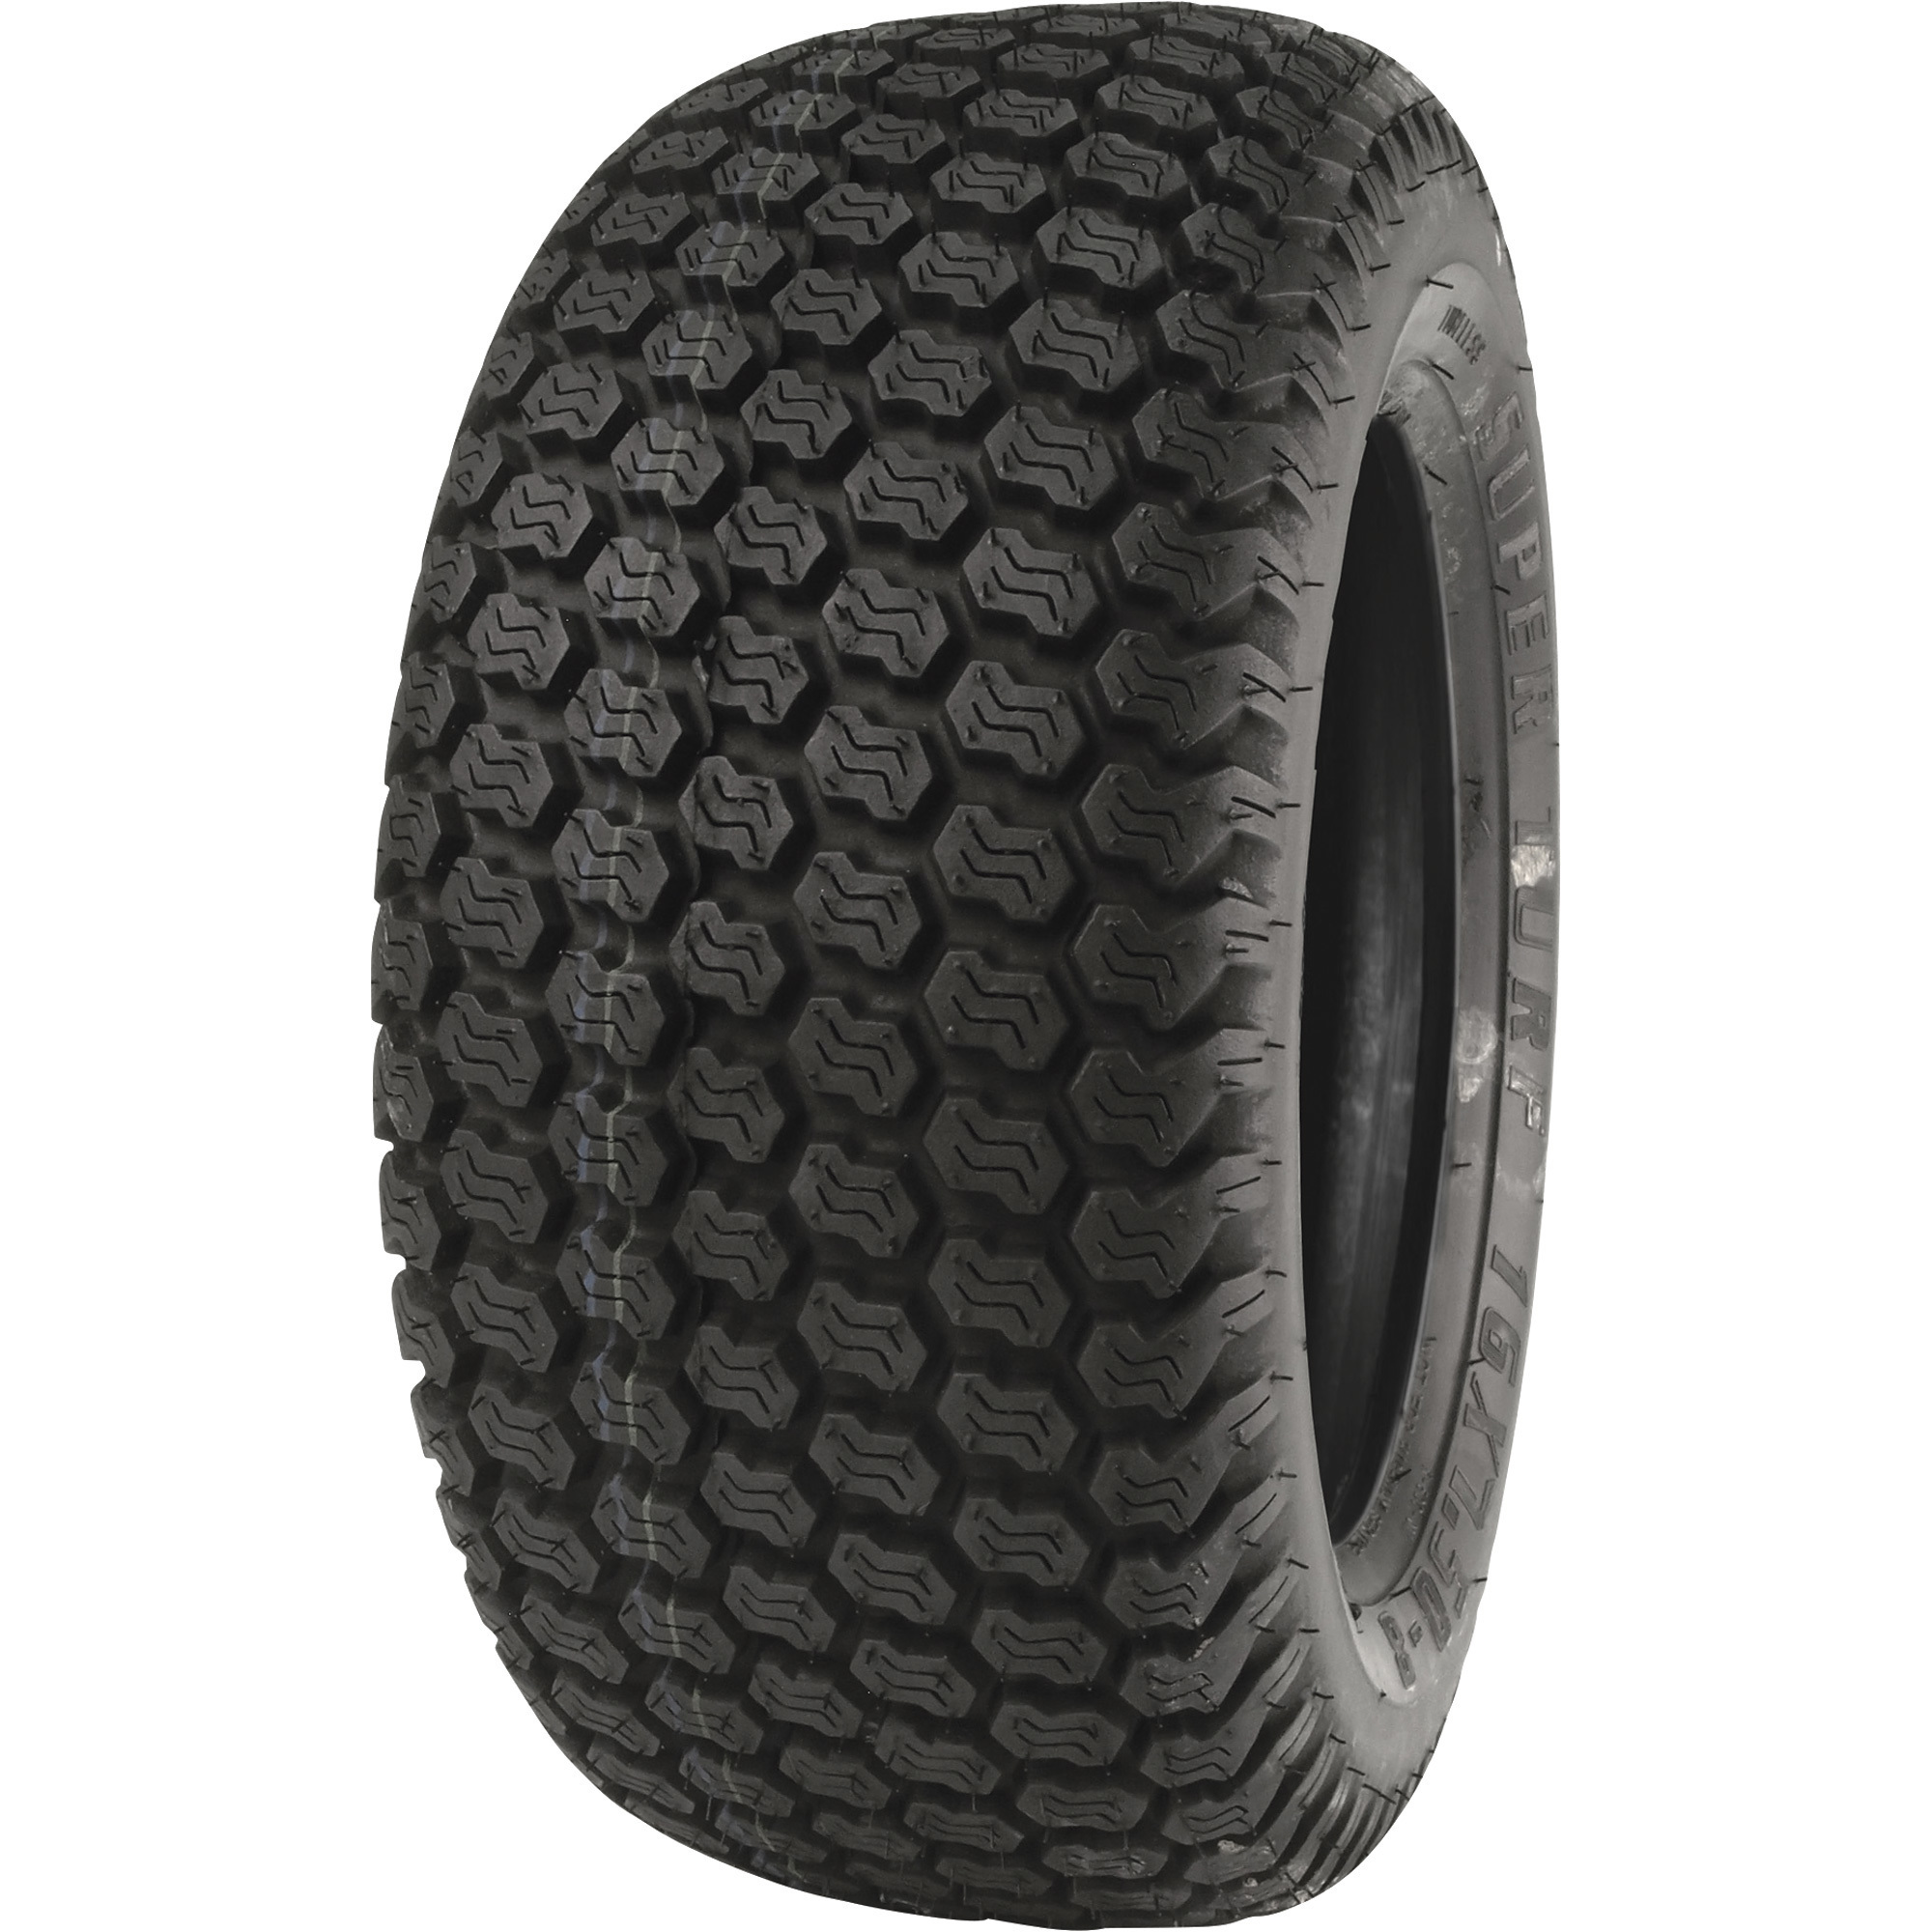 Kenda Lawn and Garden Tractor Tubeless Replacement Super Turf Tire â 16 x 750-8